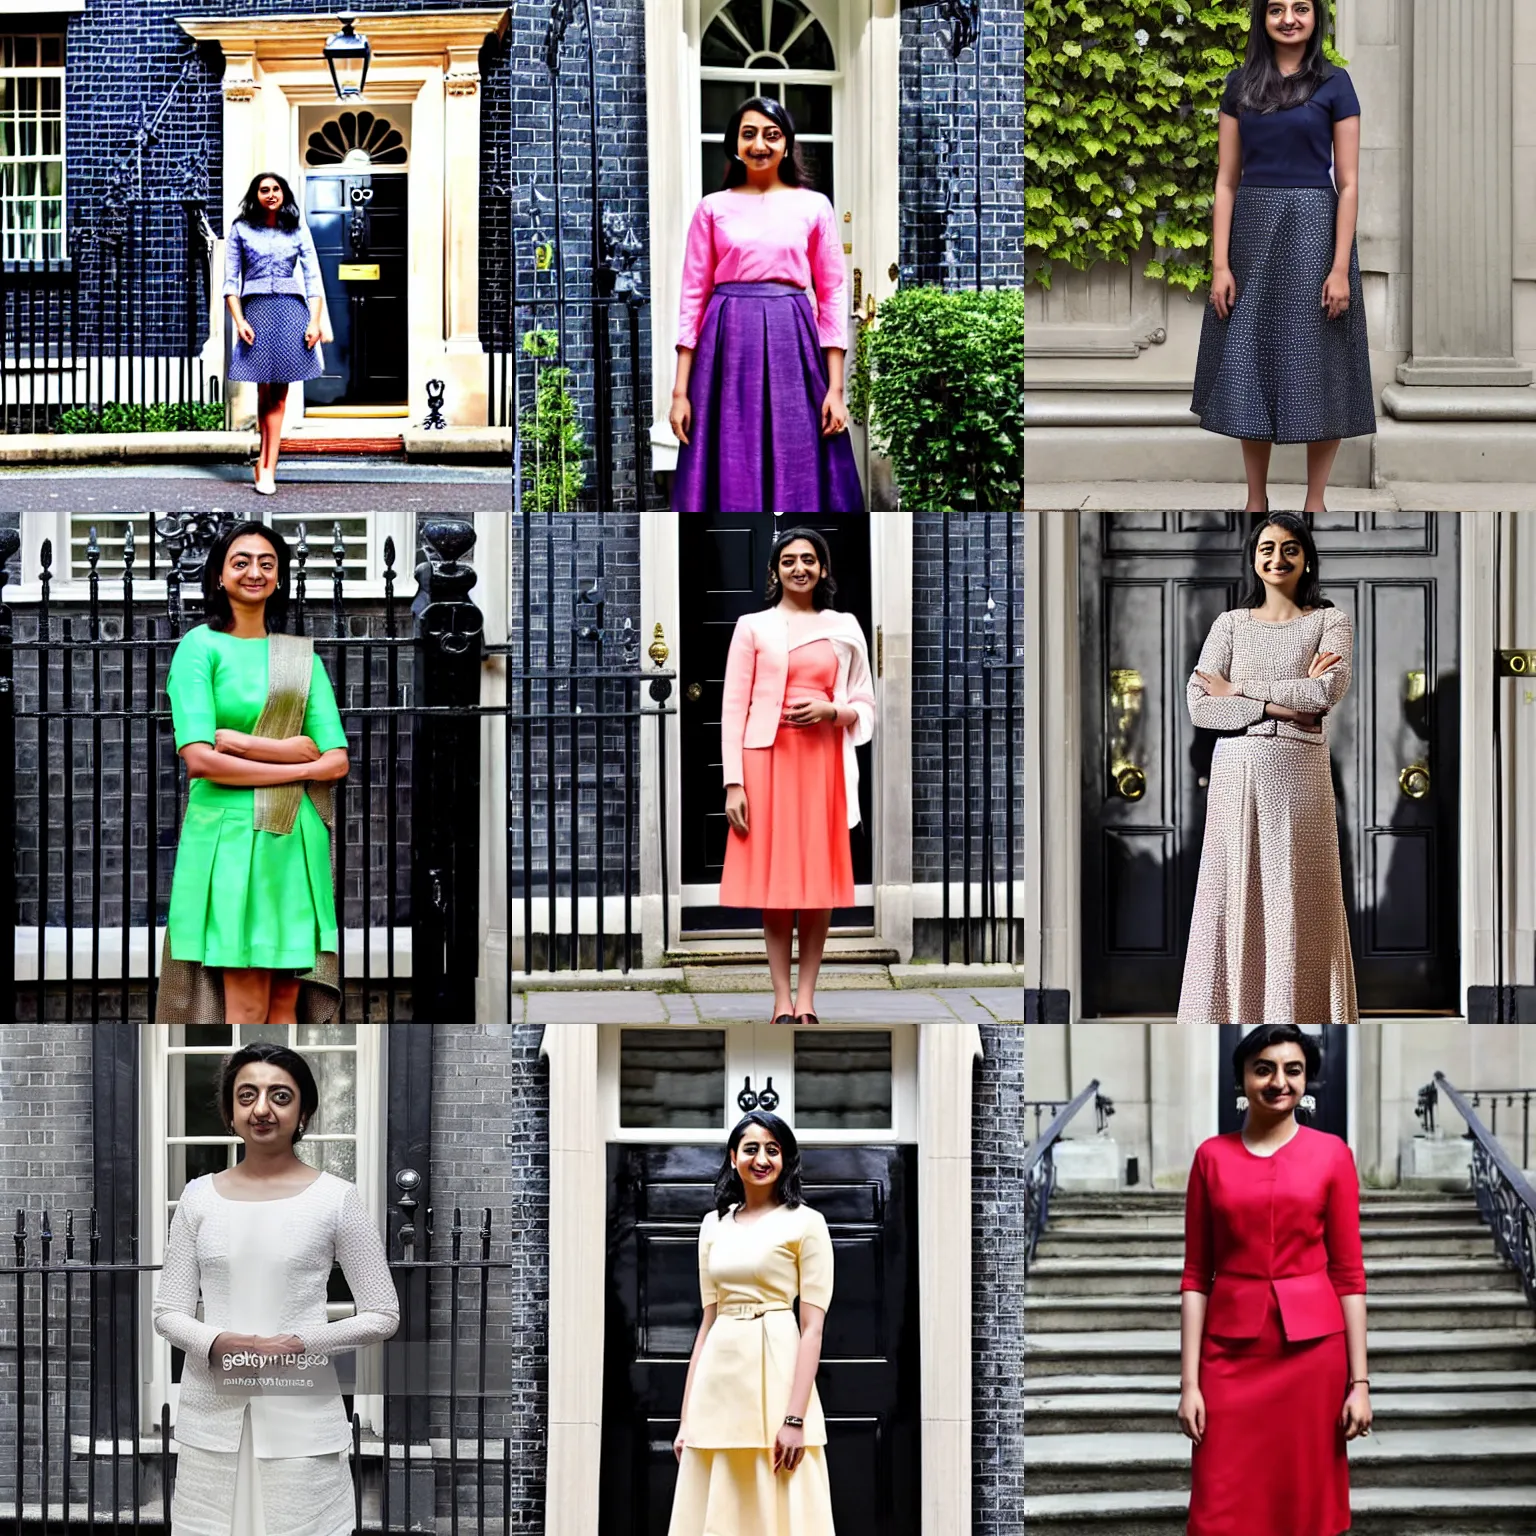 Prompt: Radhika Apte as Prime Minister, wearing a formal dress and skirt, posing outside of 10 Downing Street, official photo headshot portrait